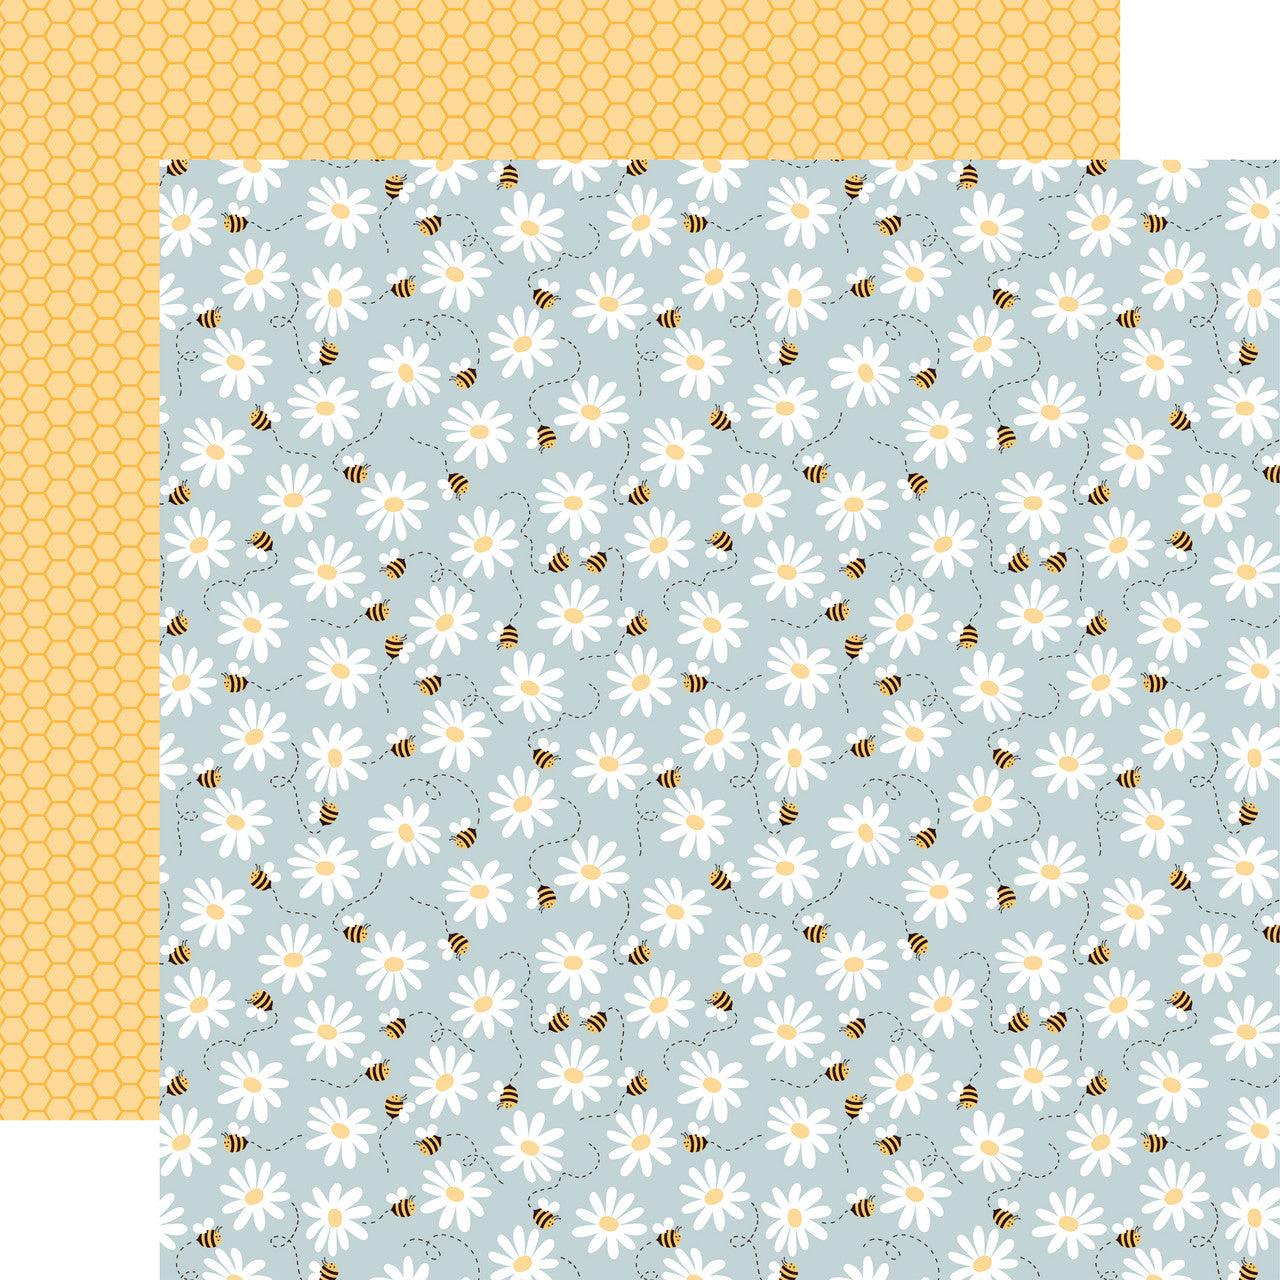 Bee Happy Collection Life Is Sweet 12 x 12 Double-Sided Scrapbook Paper by Echo Park Paper - Scrapbook Supply Companies